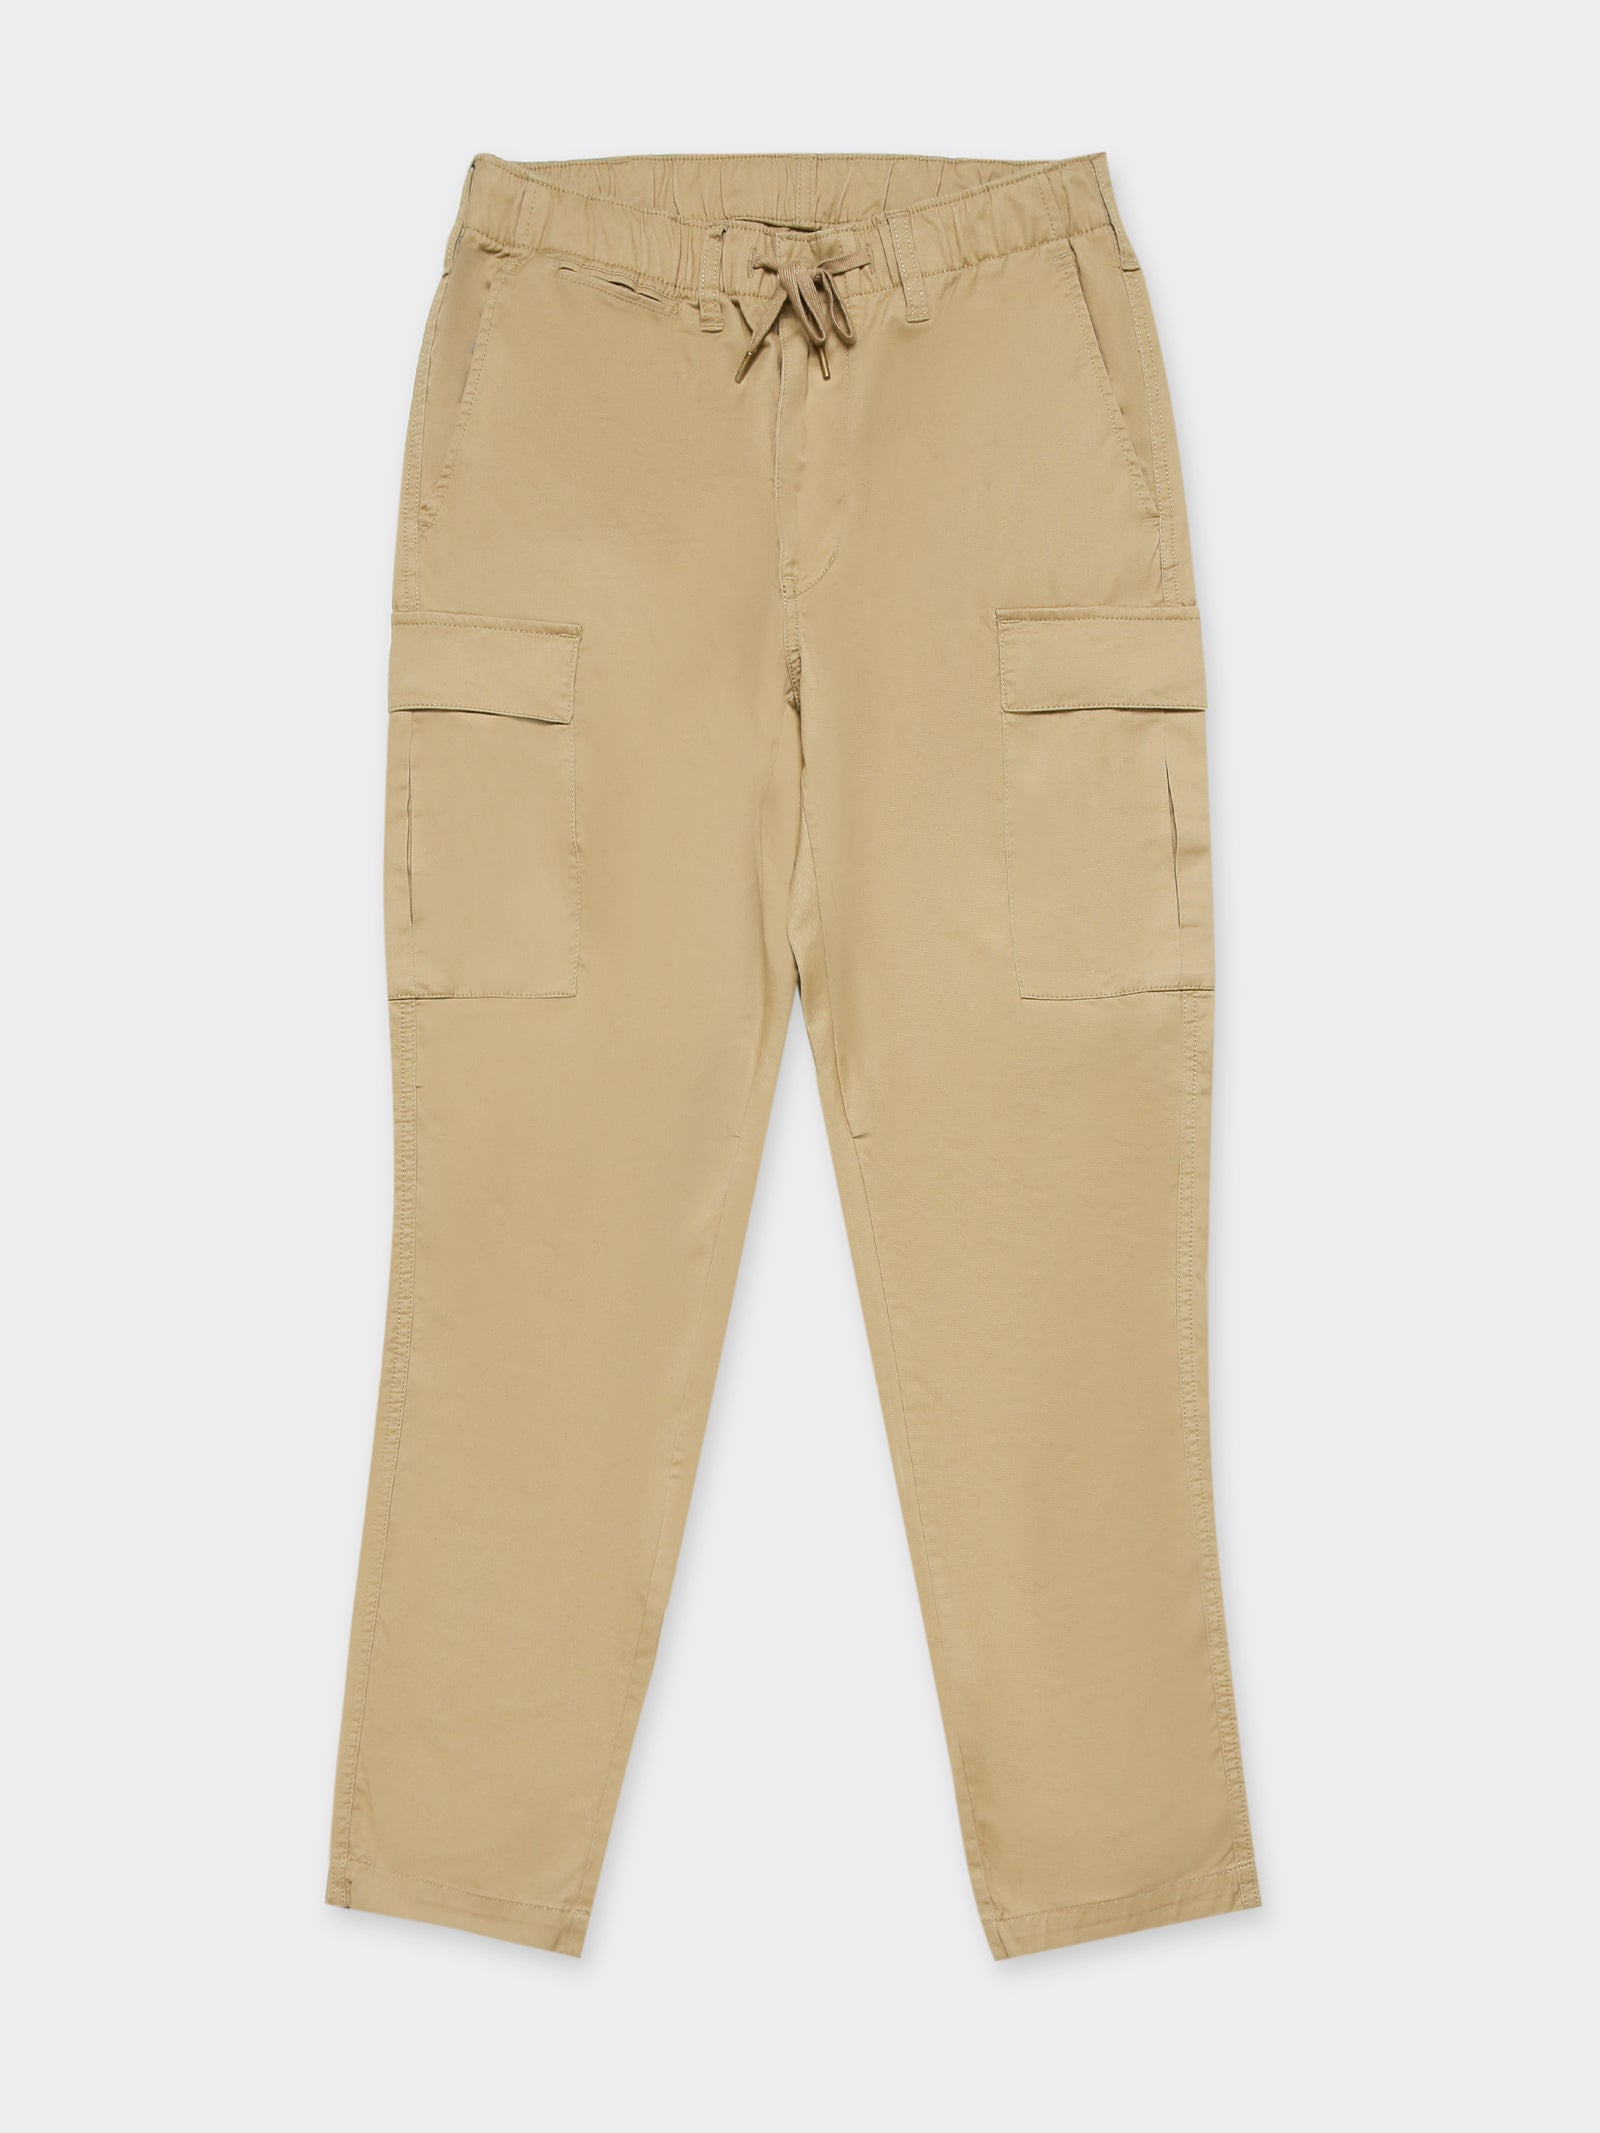 Low Union Baggy Cargo Pants in Faded Khaki - Glue Store